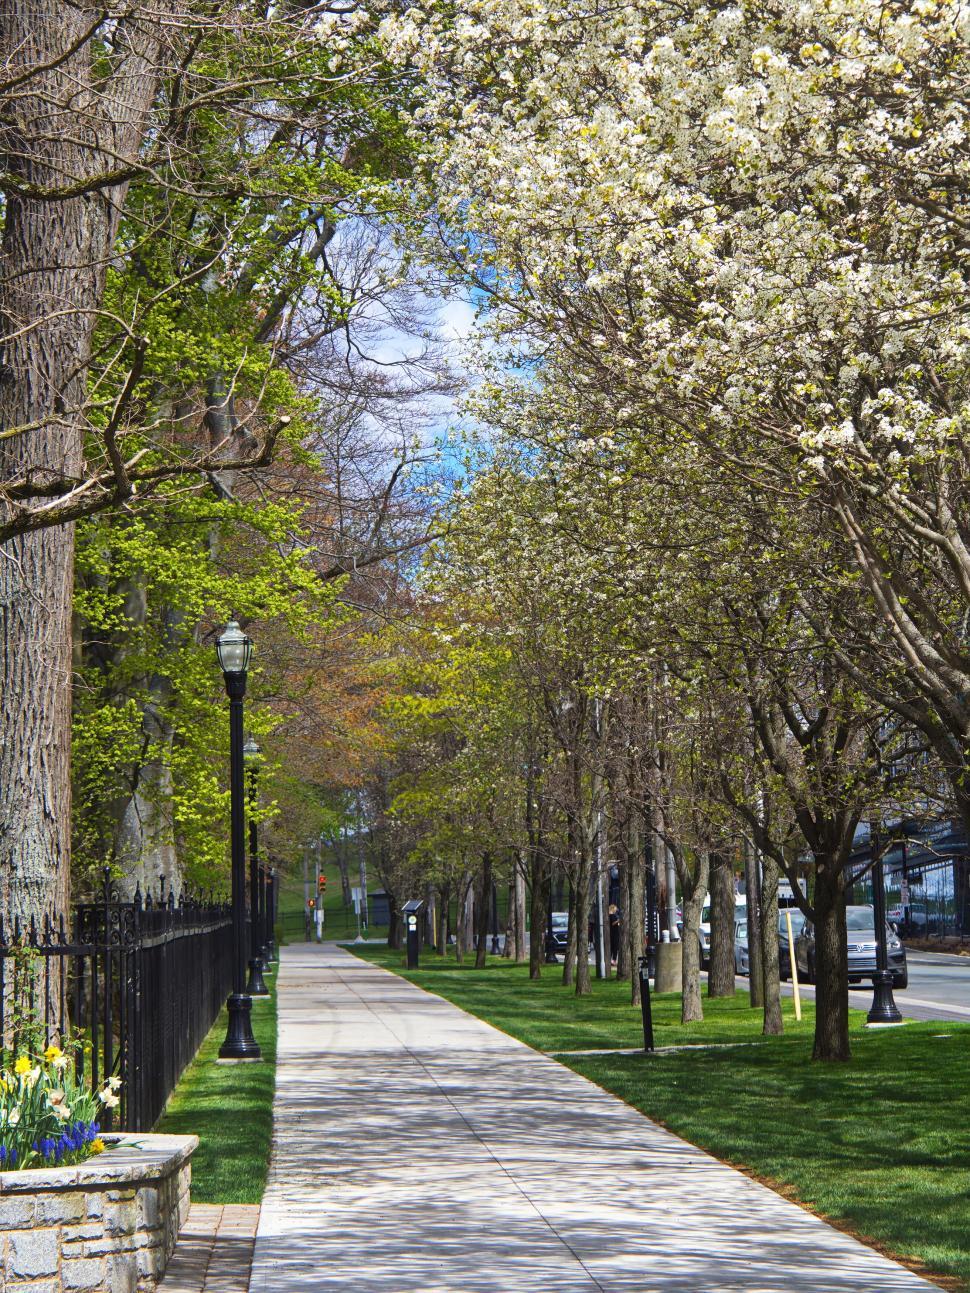 Free Image of Tree-lined pathway in a serene park avenue 